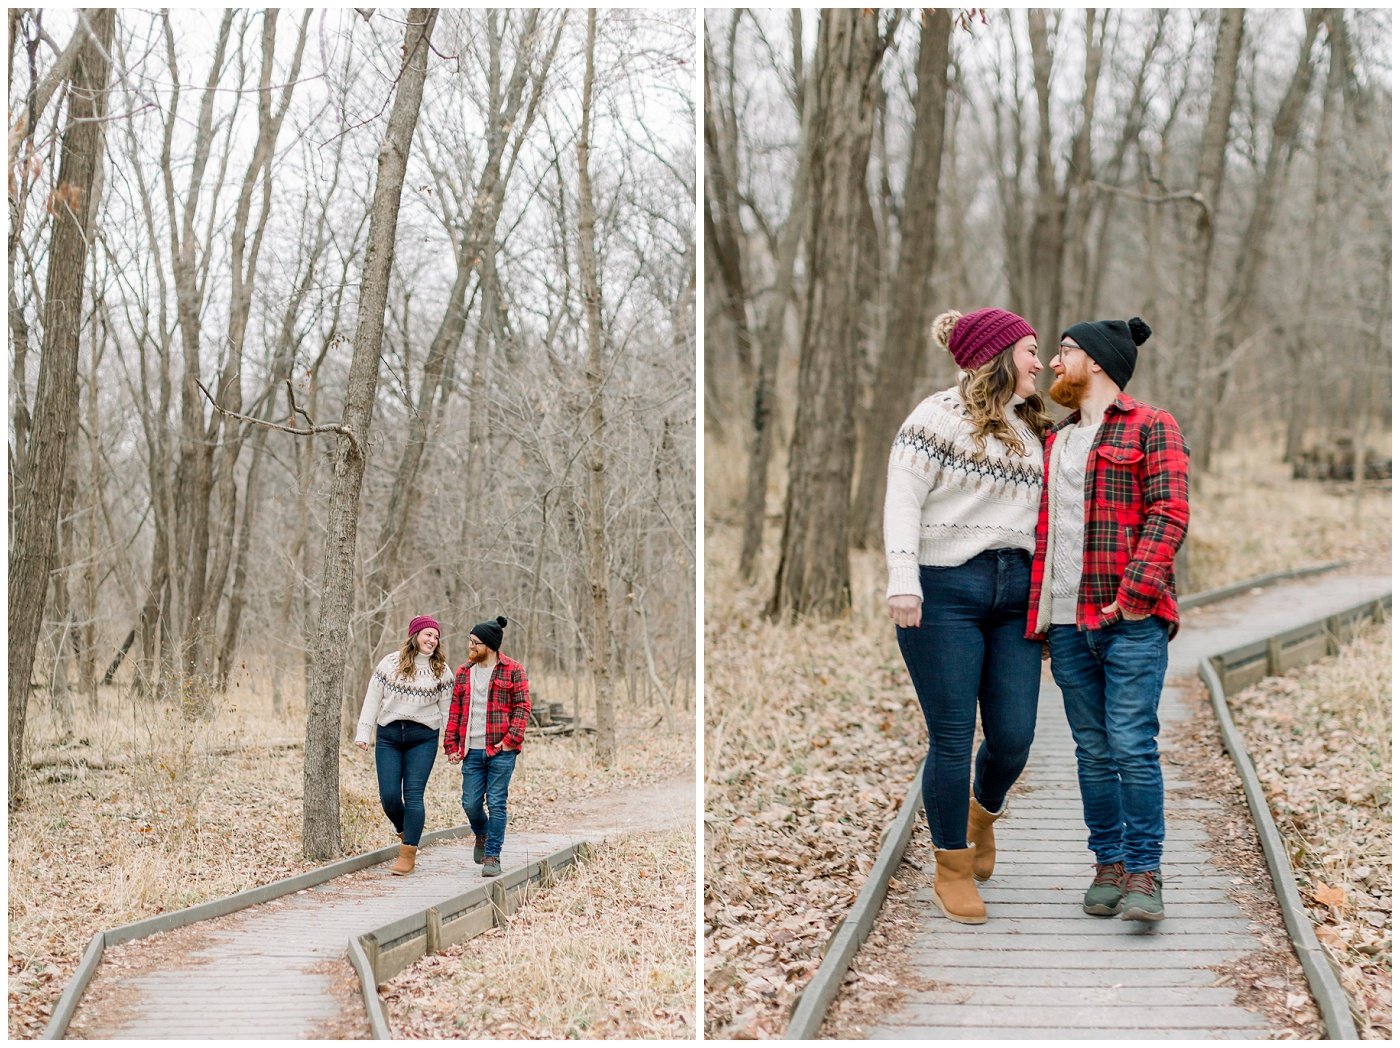 Woodsy winter engagement photos